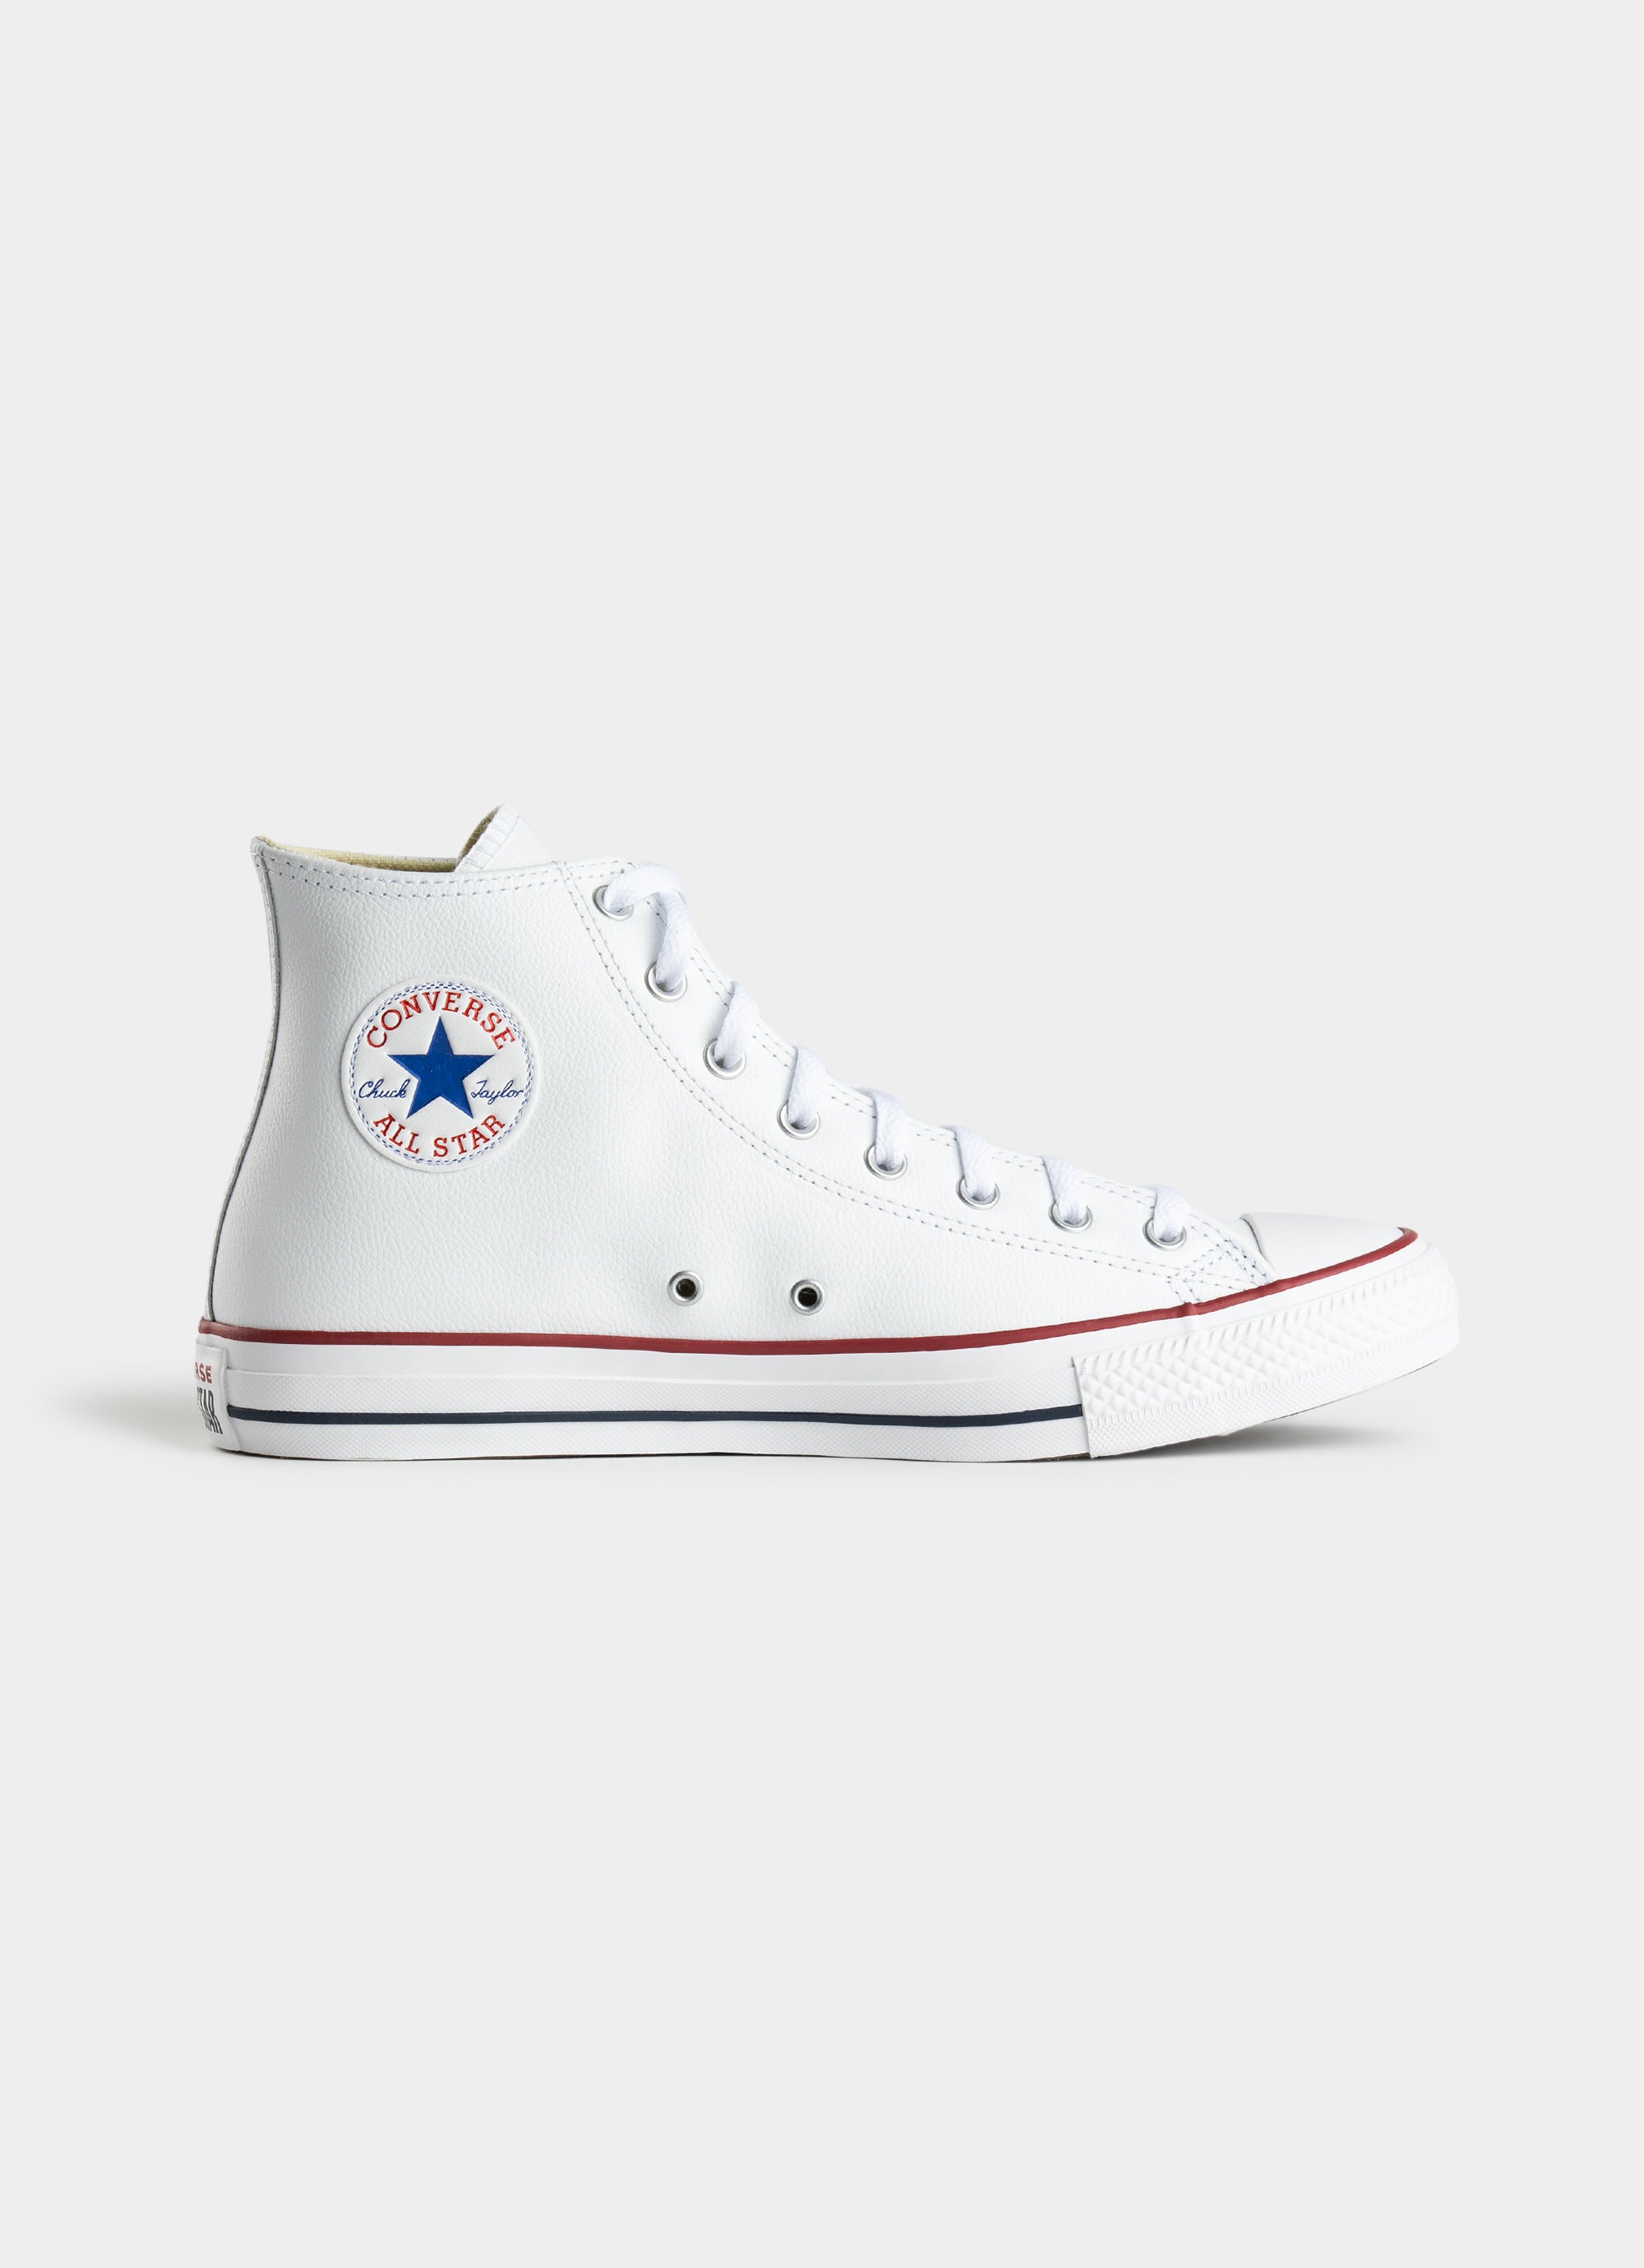 Converse Chuck Taylor All Star High 'leather' Shoe | Red Rat